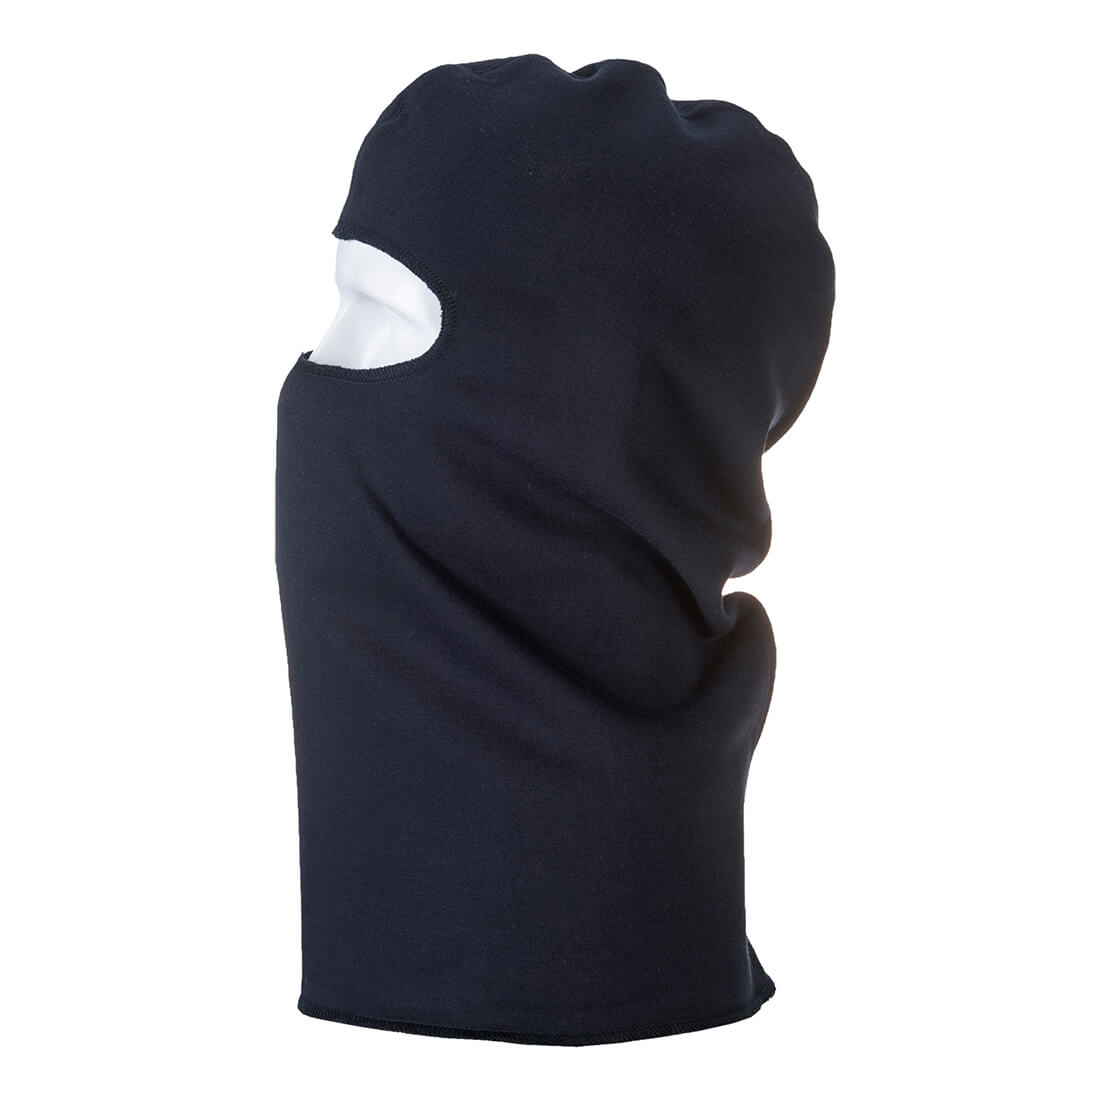 Image of Modaflame Anti Static Flame Resistant Balaclava Navy One Size